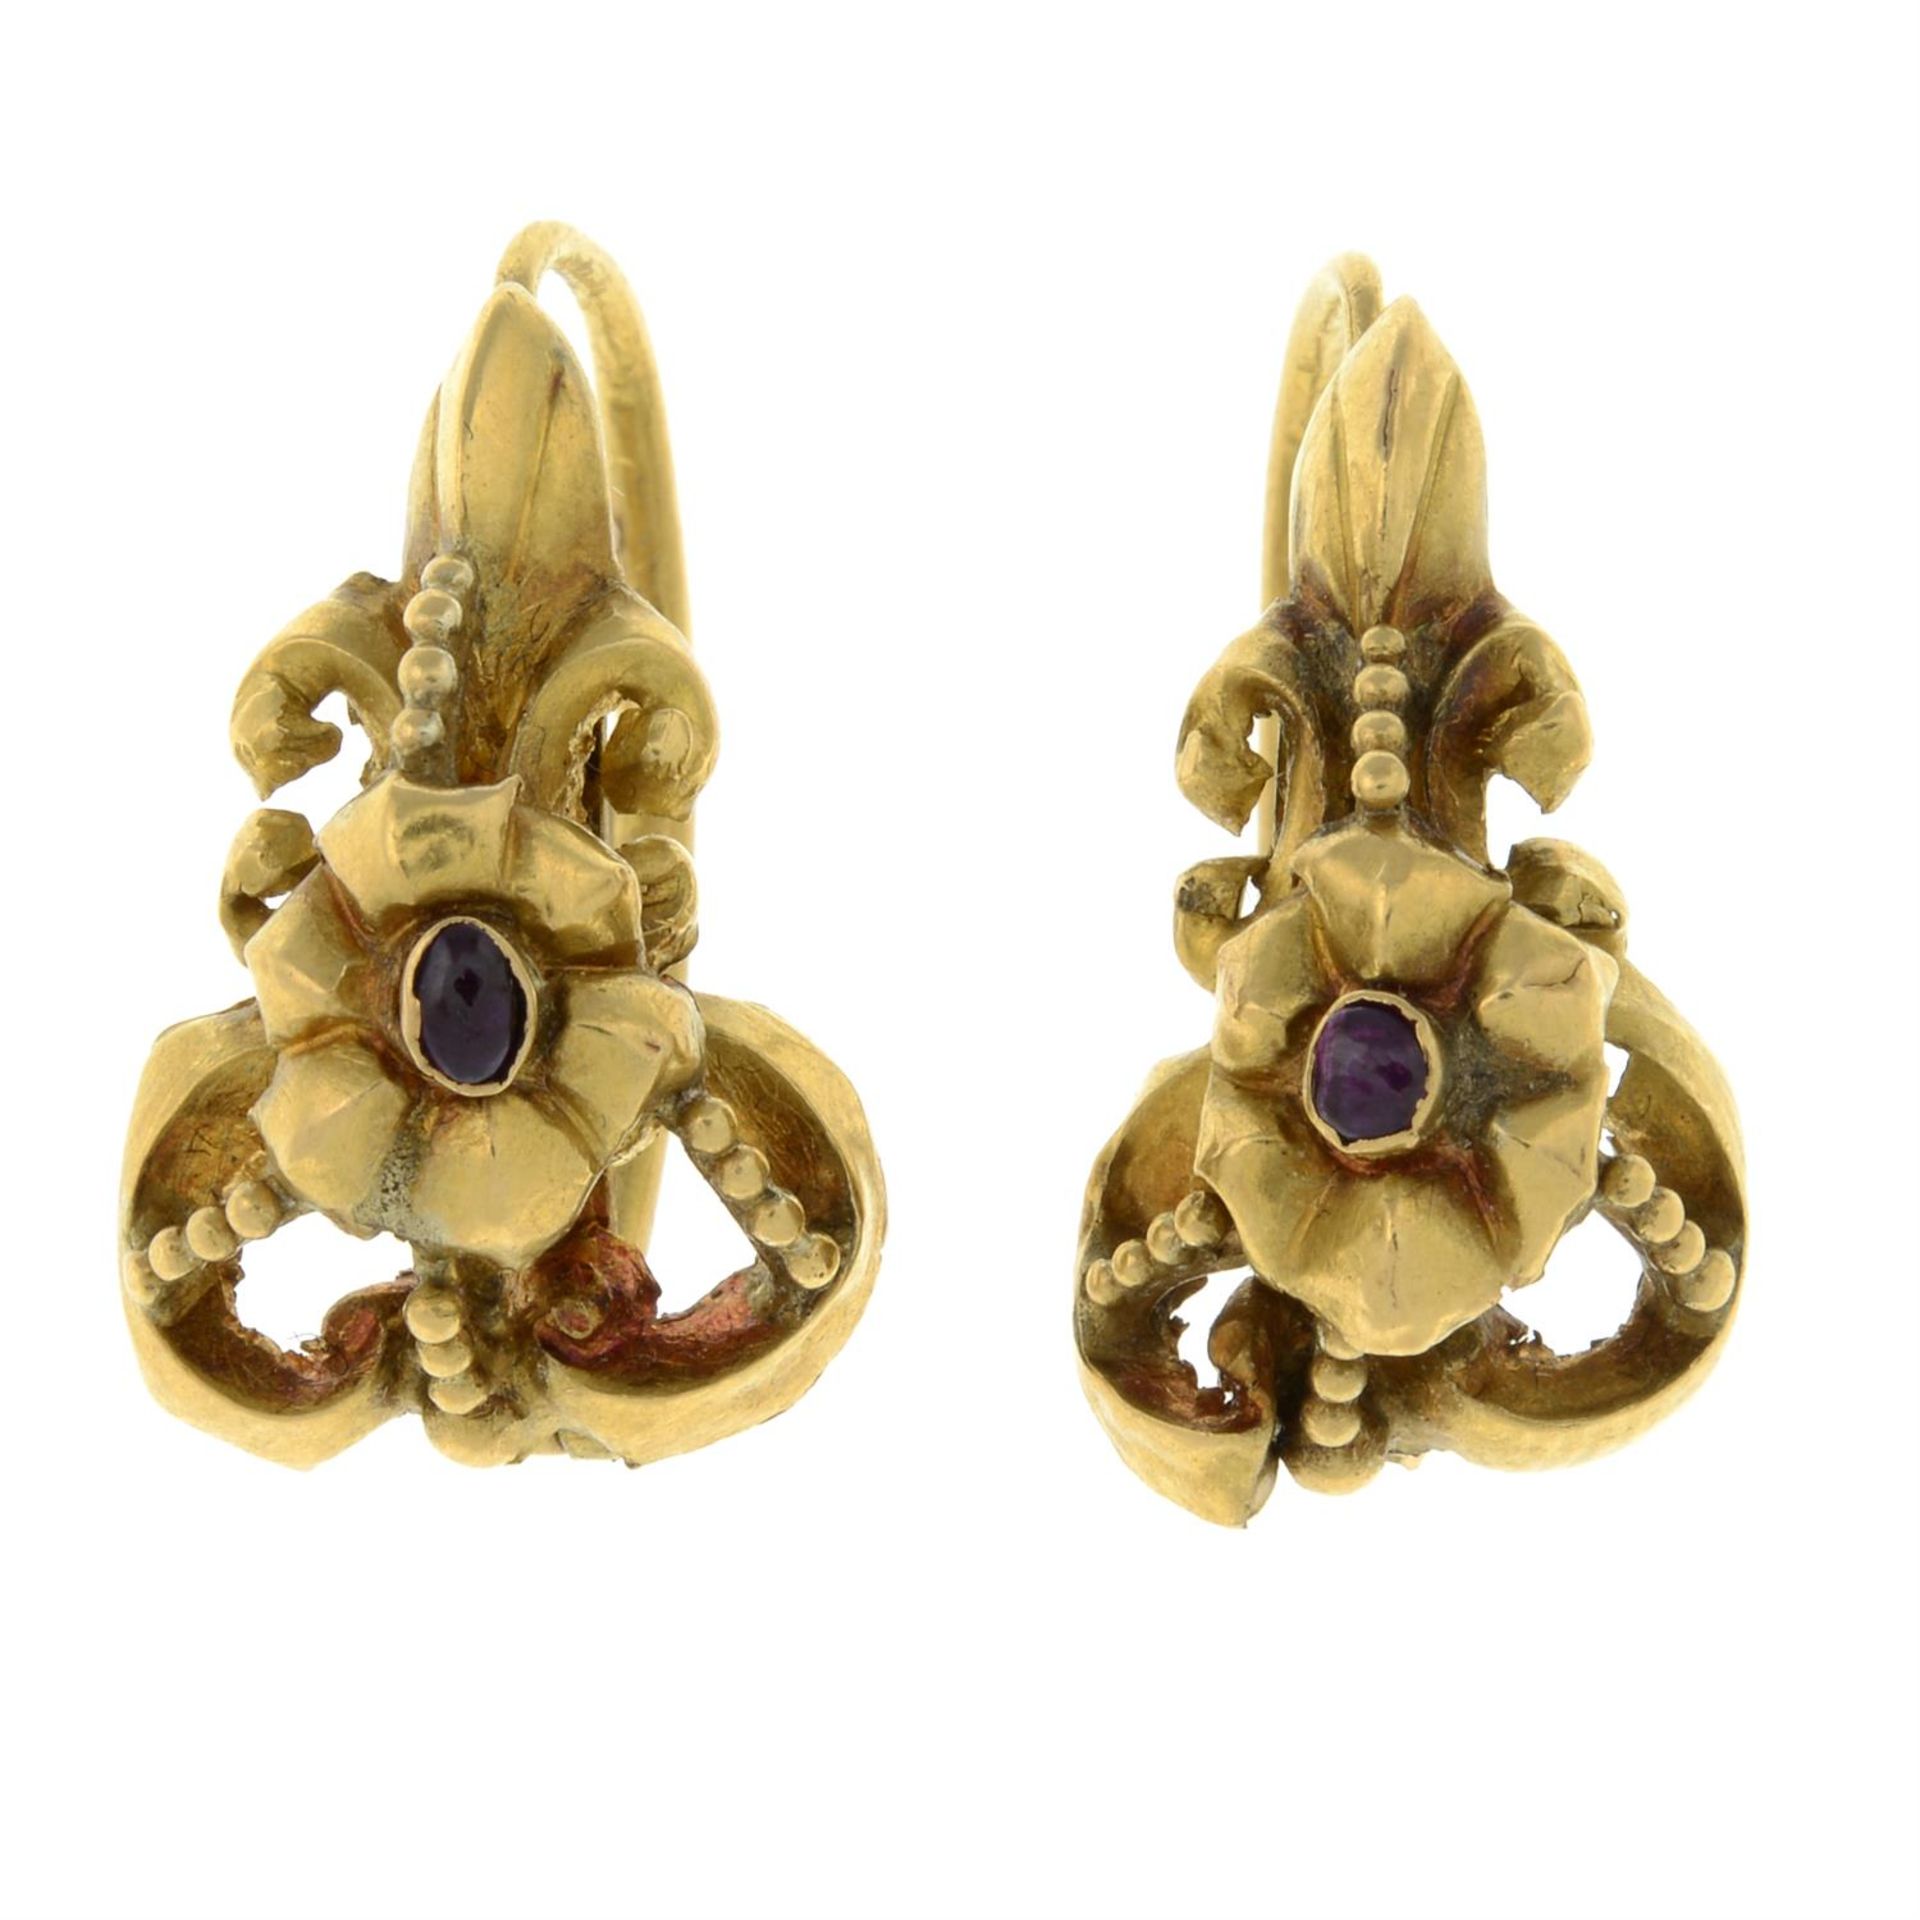 A pair of late 19th century gold cabochon ruby hinge-back earrings.